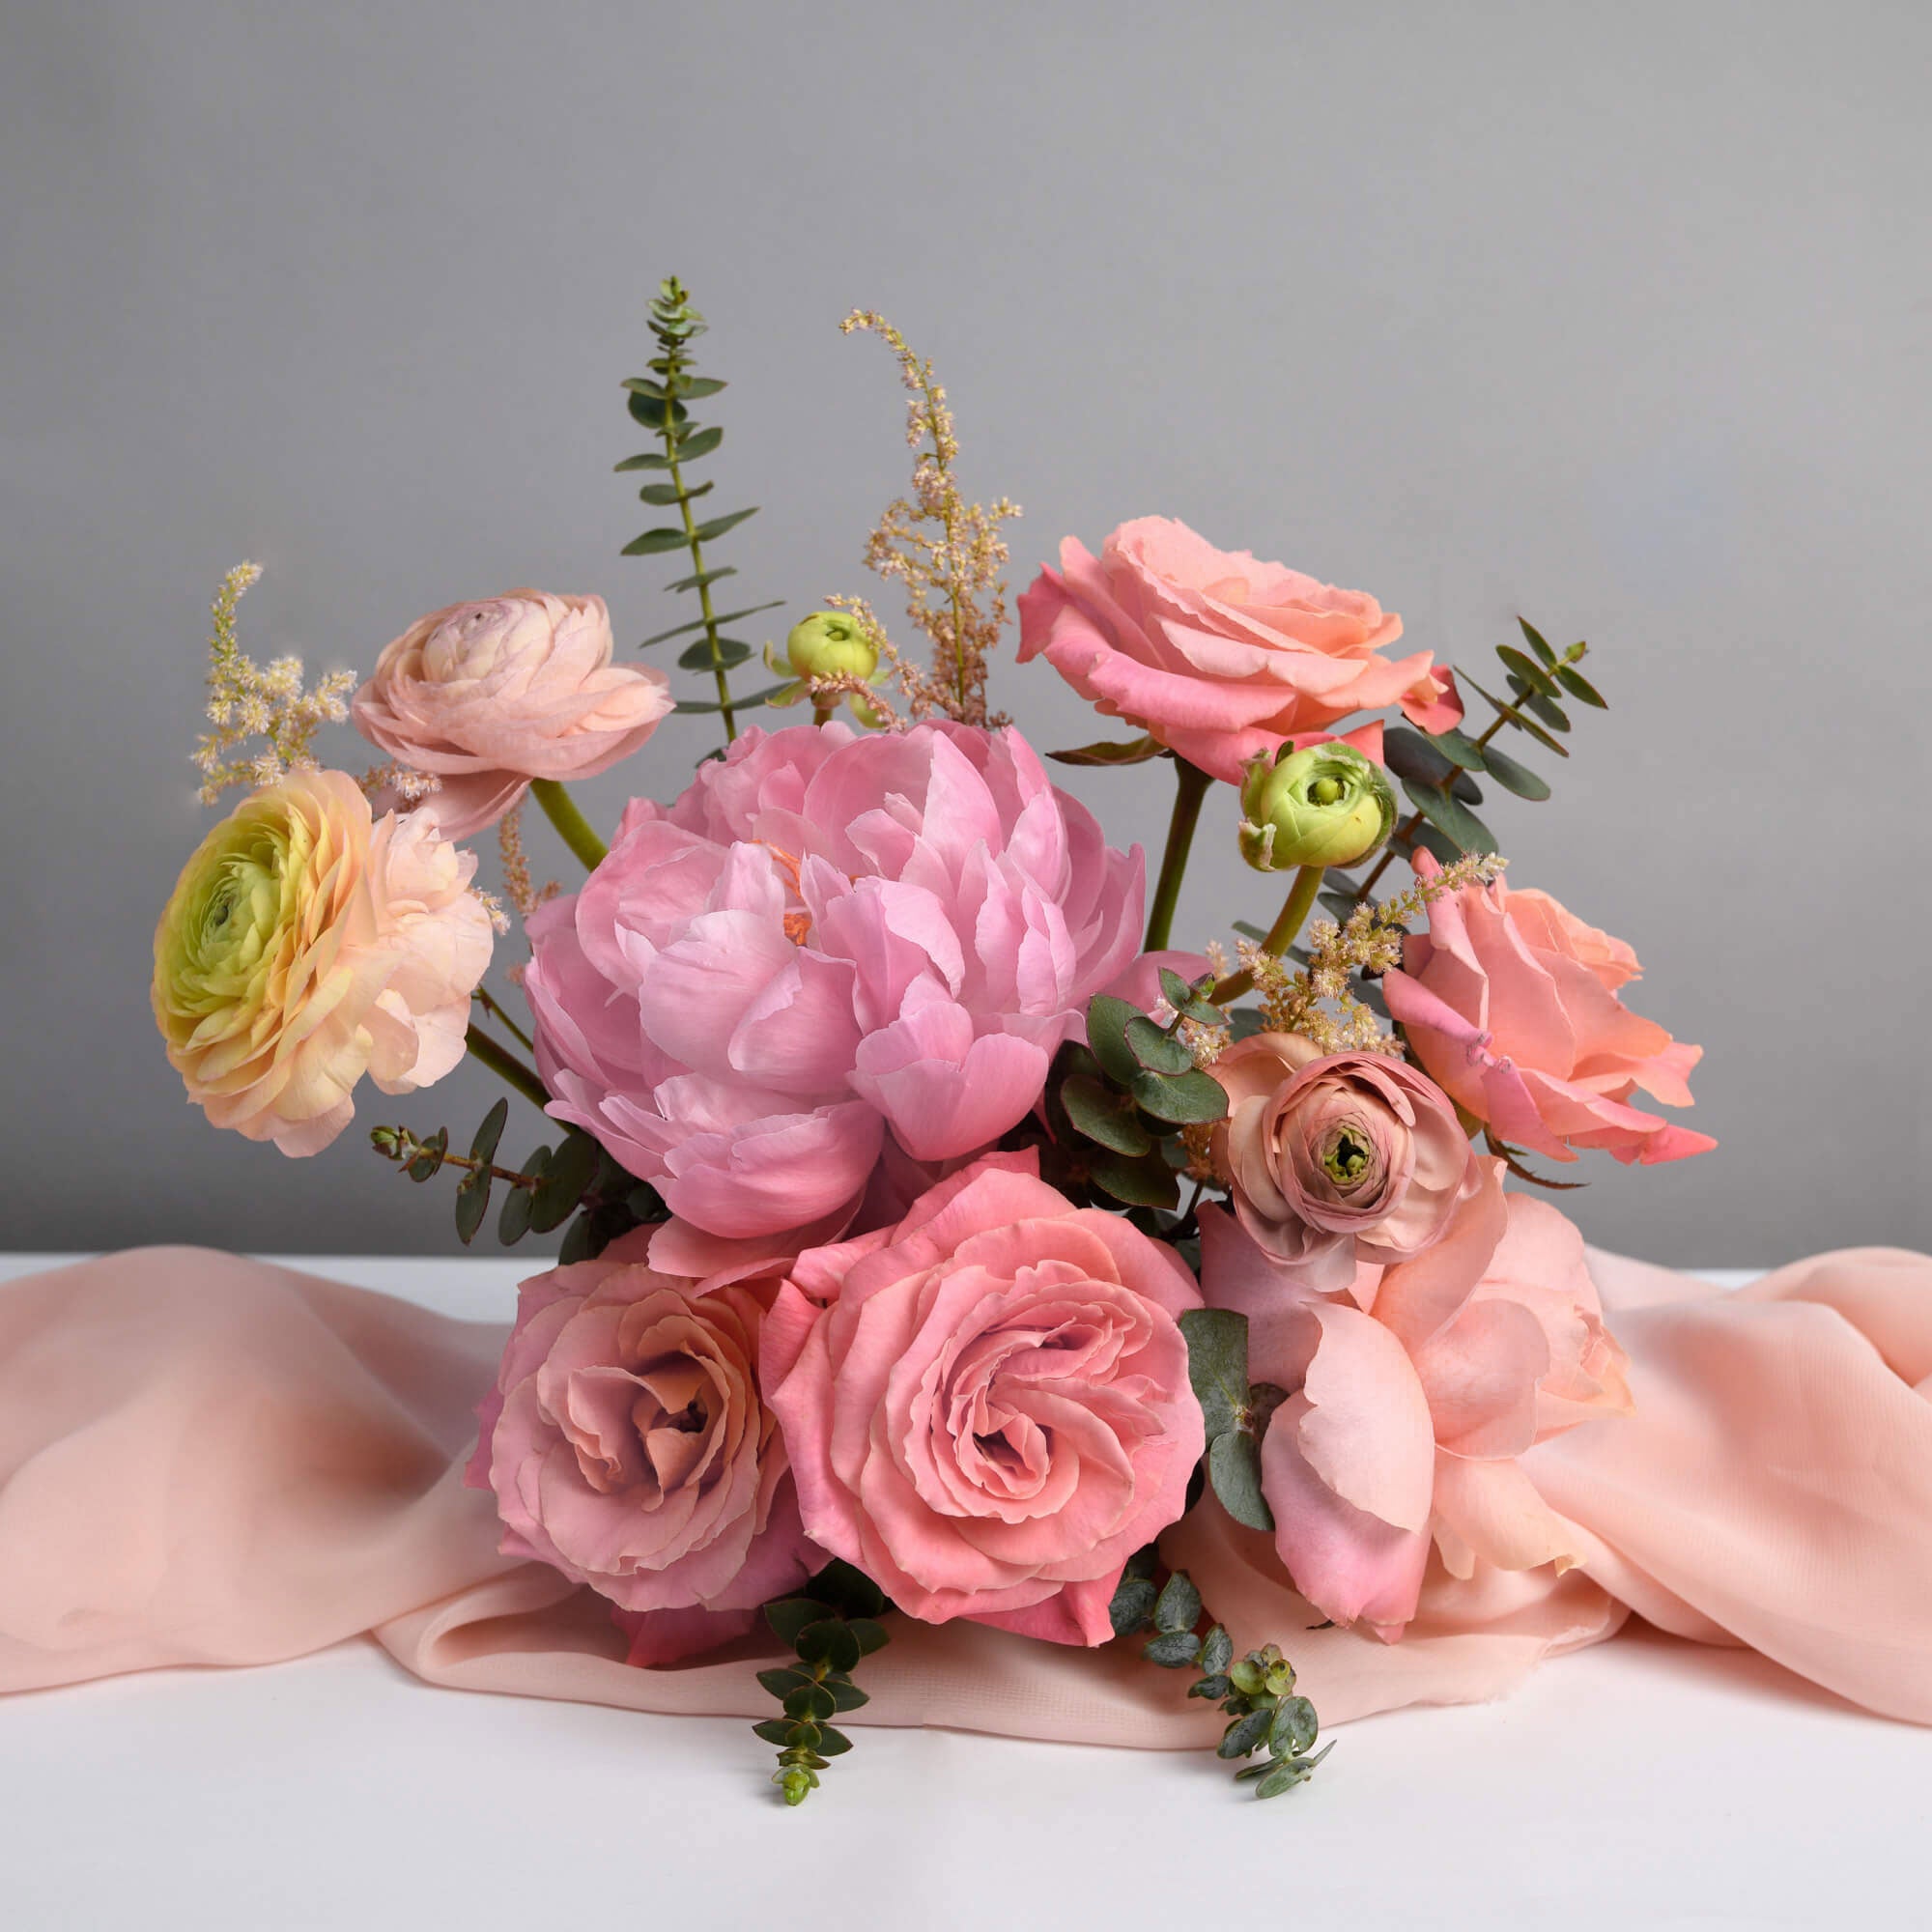 Table arrangement with peonies and roses